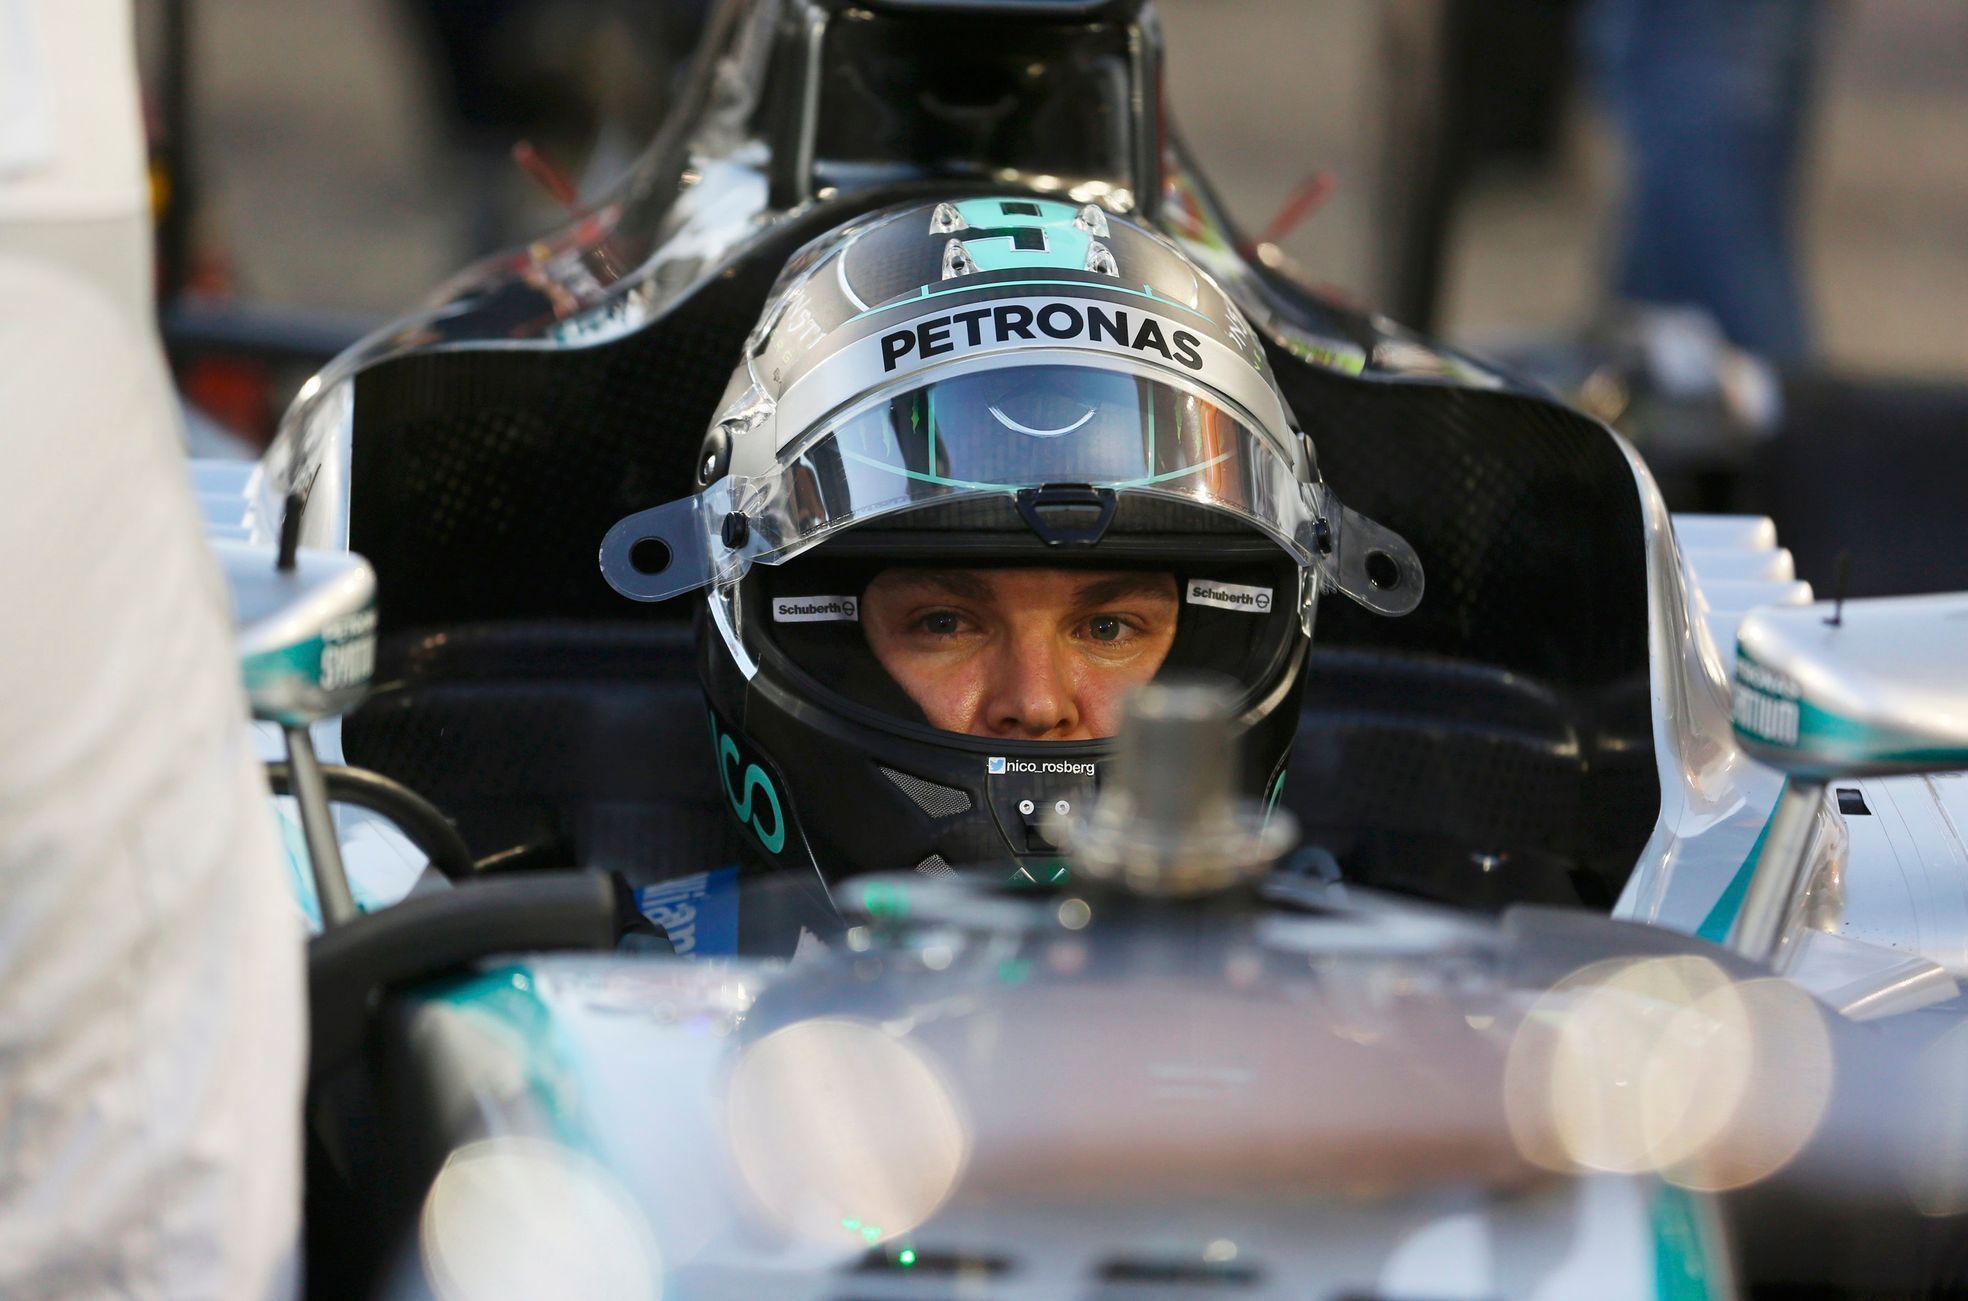 Mercedes Formula One driver Nico Rosberg of Germany sits in his car before the start of the Bahrain F1 Grand Prix at the Bahrain International Circuit (BIC) in Sakhir